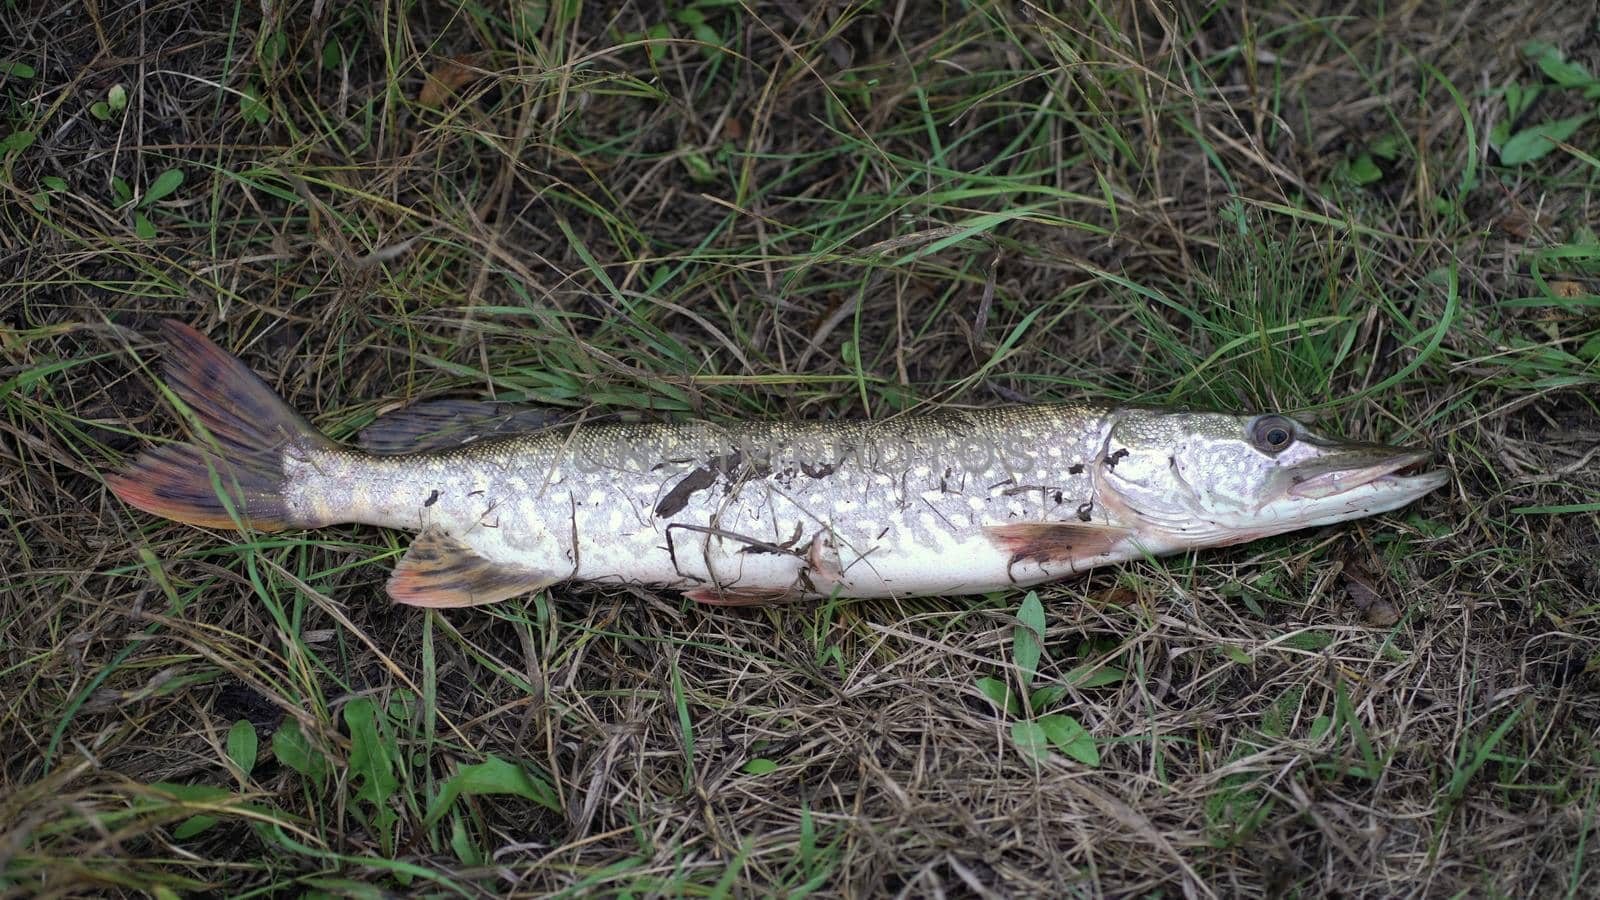 Live pike caught by the fisherman lies on the grass by Petrokill